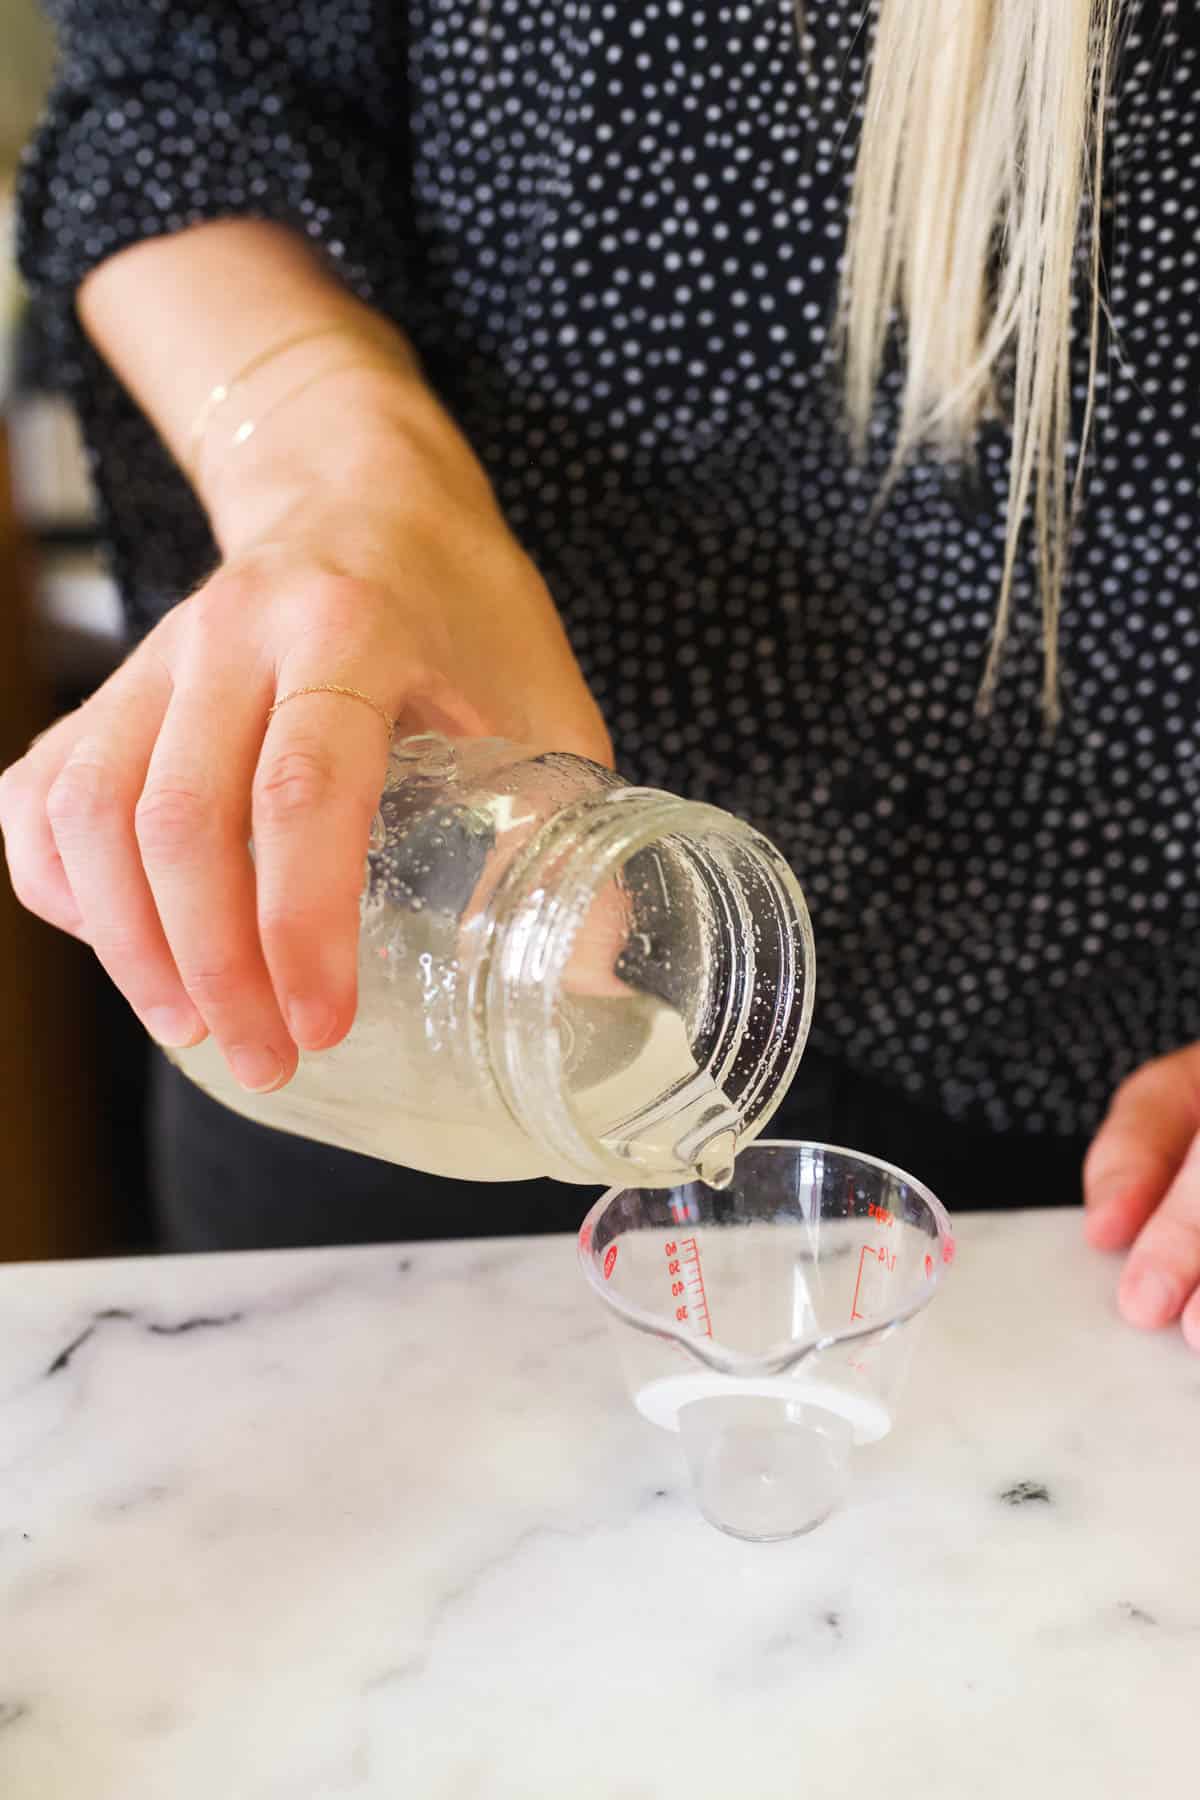 Woman pouring a jar of simple syrup into a measuring cup.